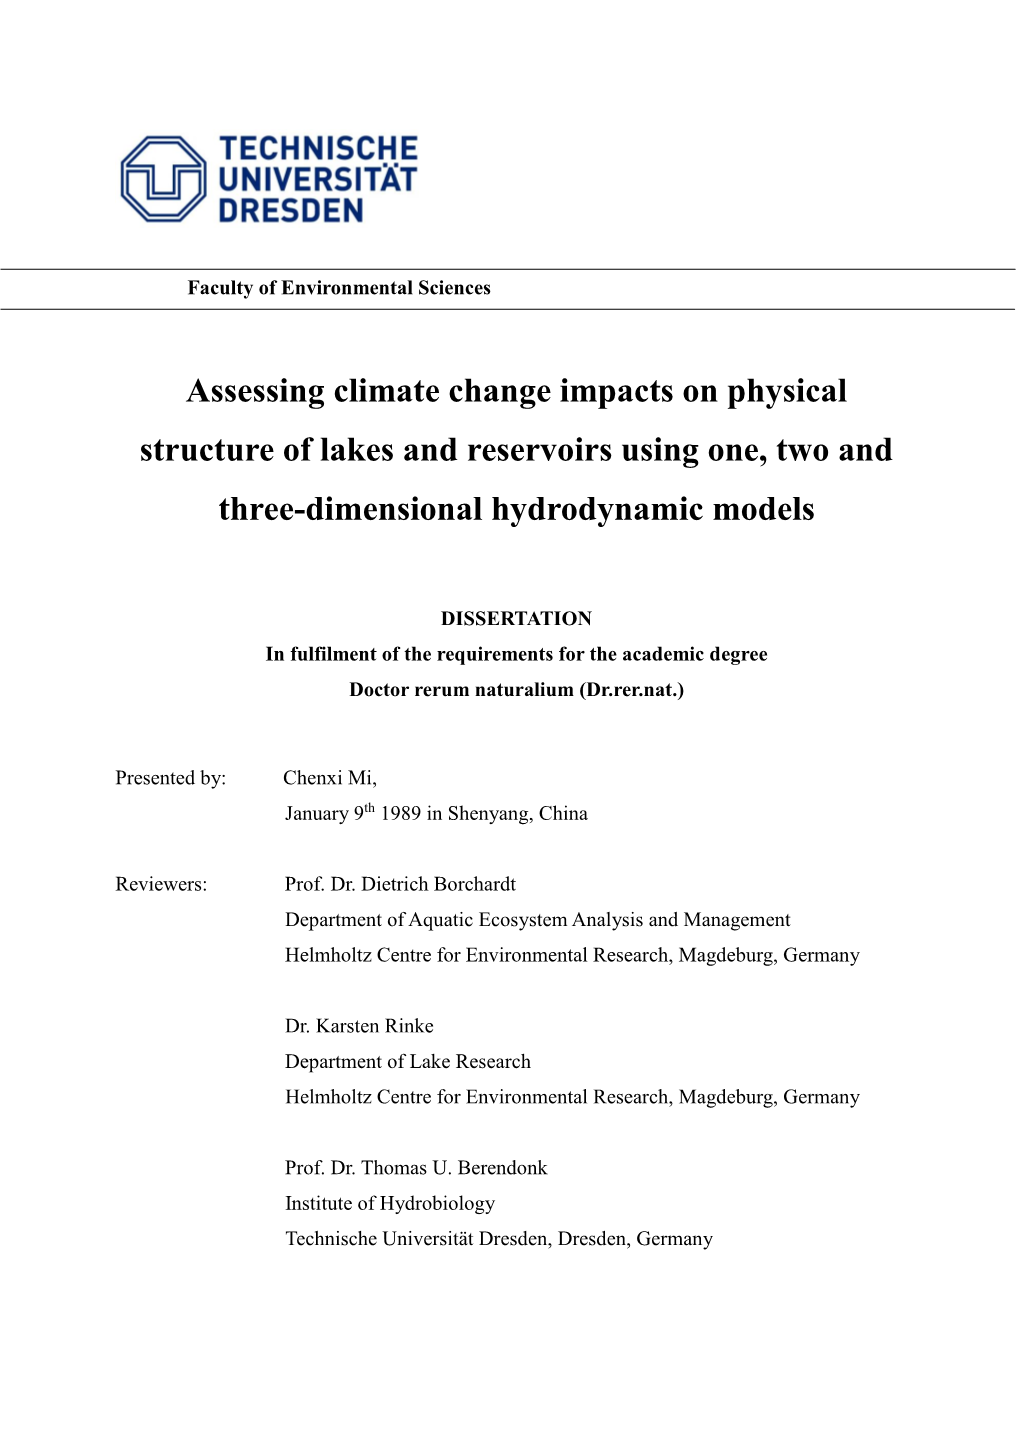 Assessing Climate Change Impacts on Physical Structure of Lakes and Reservoirs Using One, Two and Three-Dimensional Hydrodynamic Models